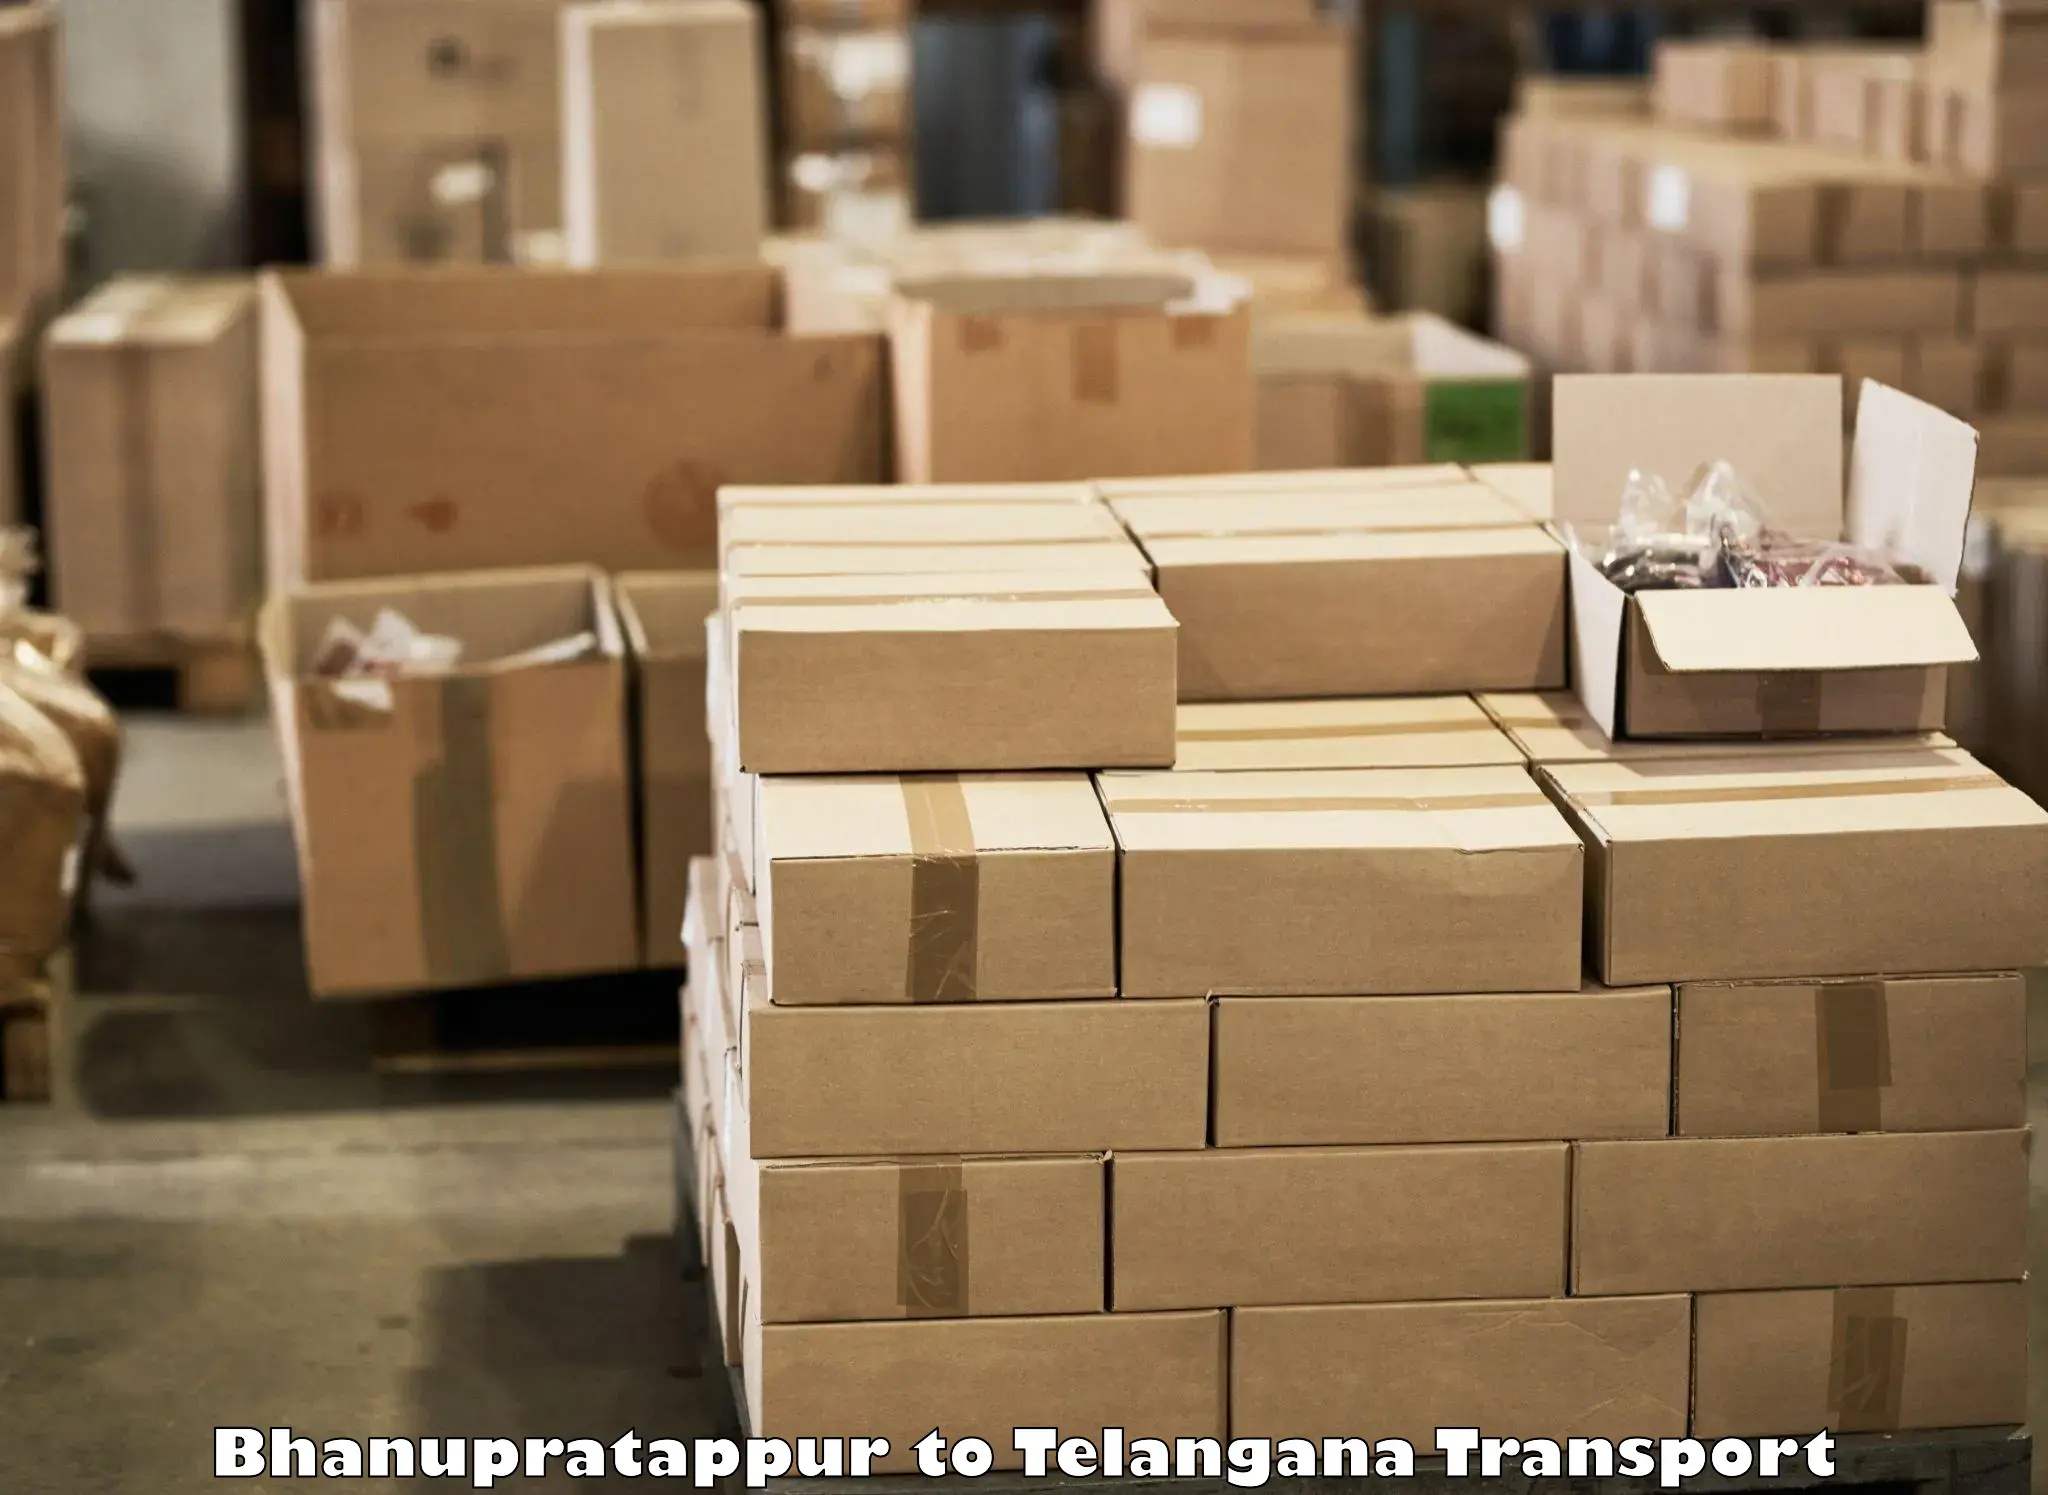 Daily parcel service transport Bhanupratappur to Ghanpur